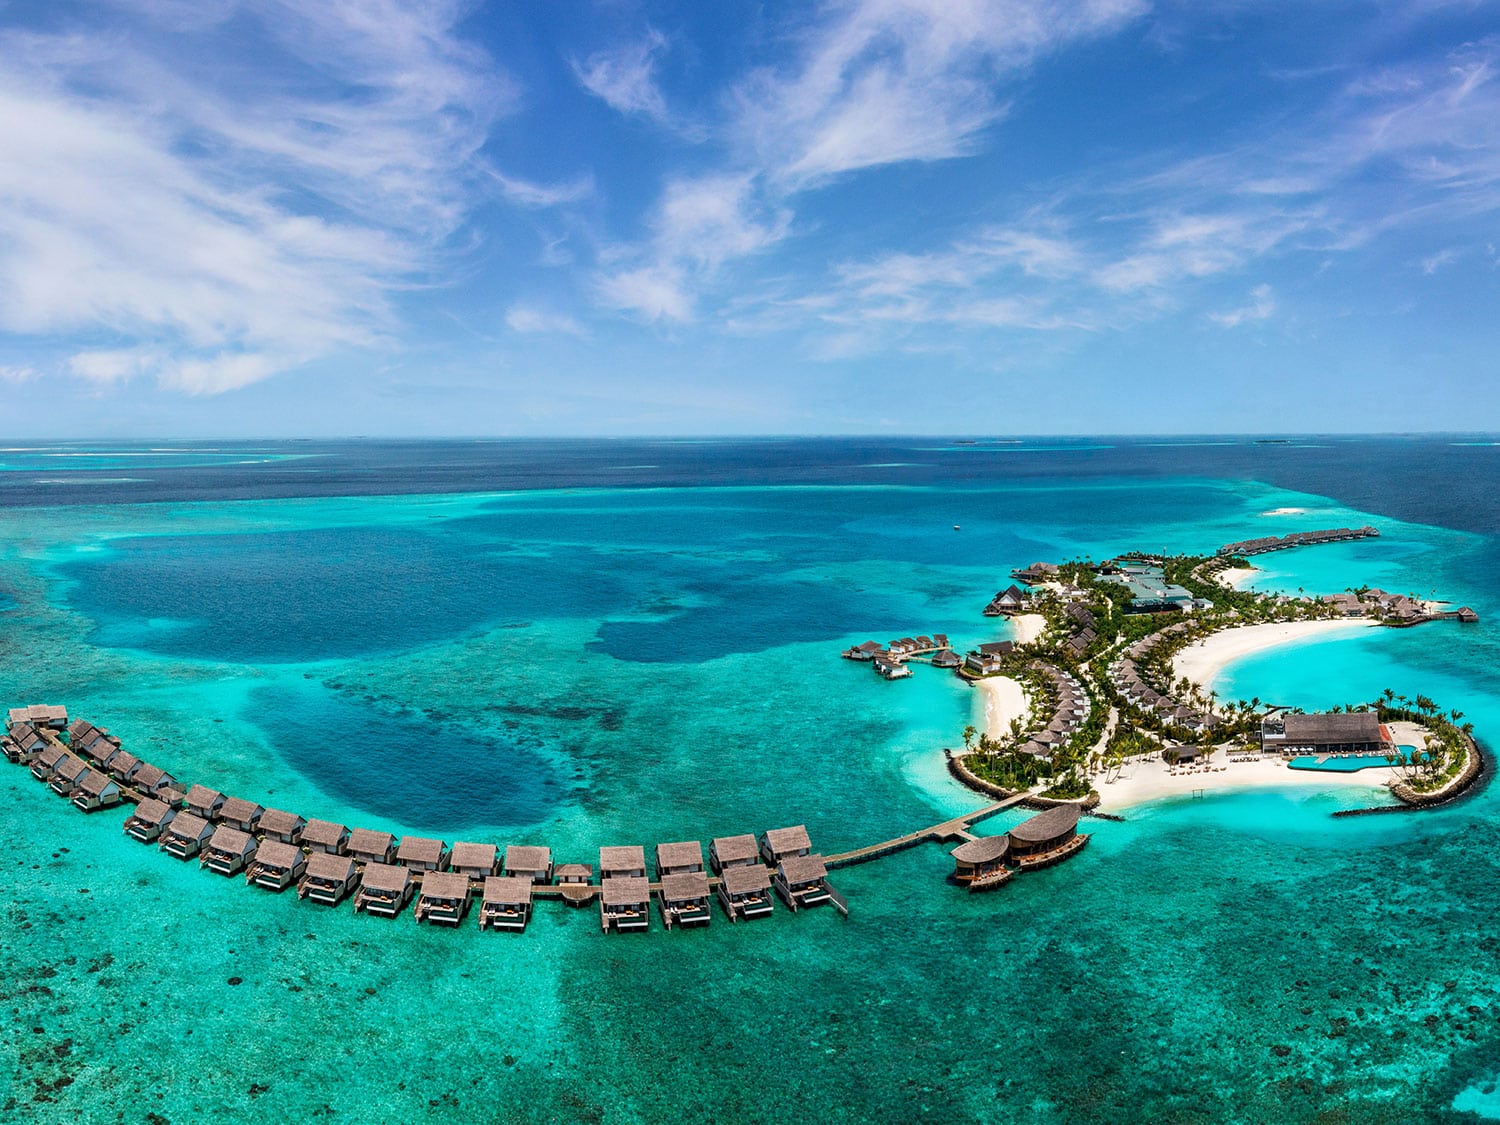 An aerial view of the property and overwater bungalows at Hilton Maldives Amingiri Resort and Spa.